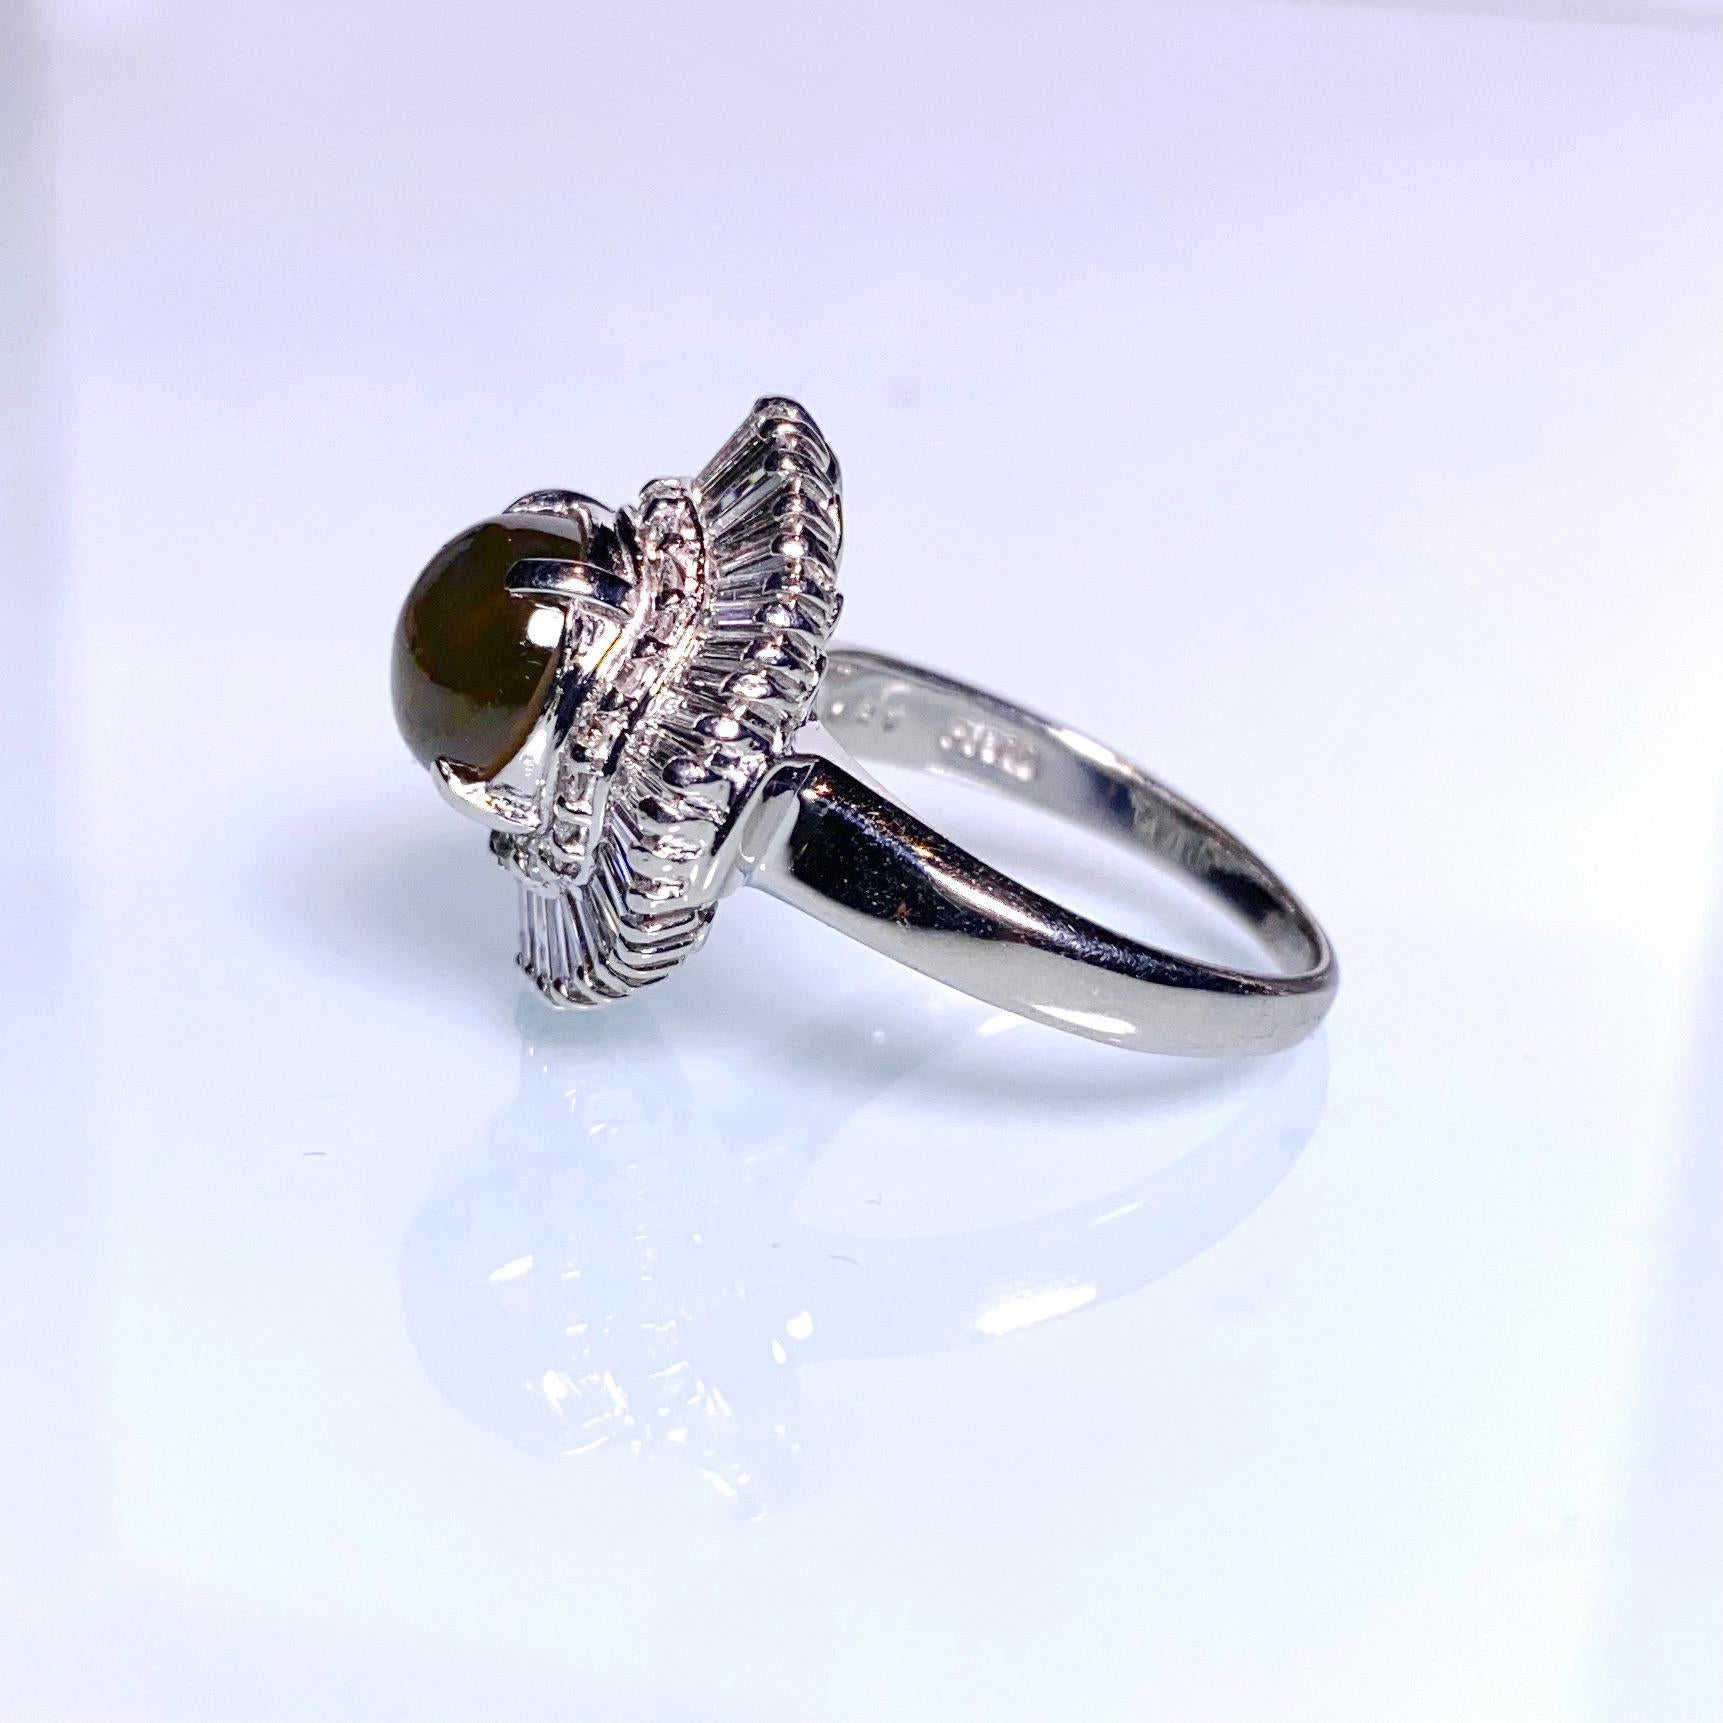 This is a Cat's Eye Chryspberyl ballerina setting in Platinum 900. This is a very common setting that allows the main stone to stands out and at the same time providing maximum Diamond surface. This is a perfect ring for vintage style jewellery